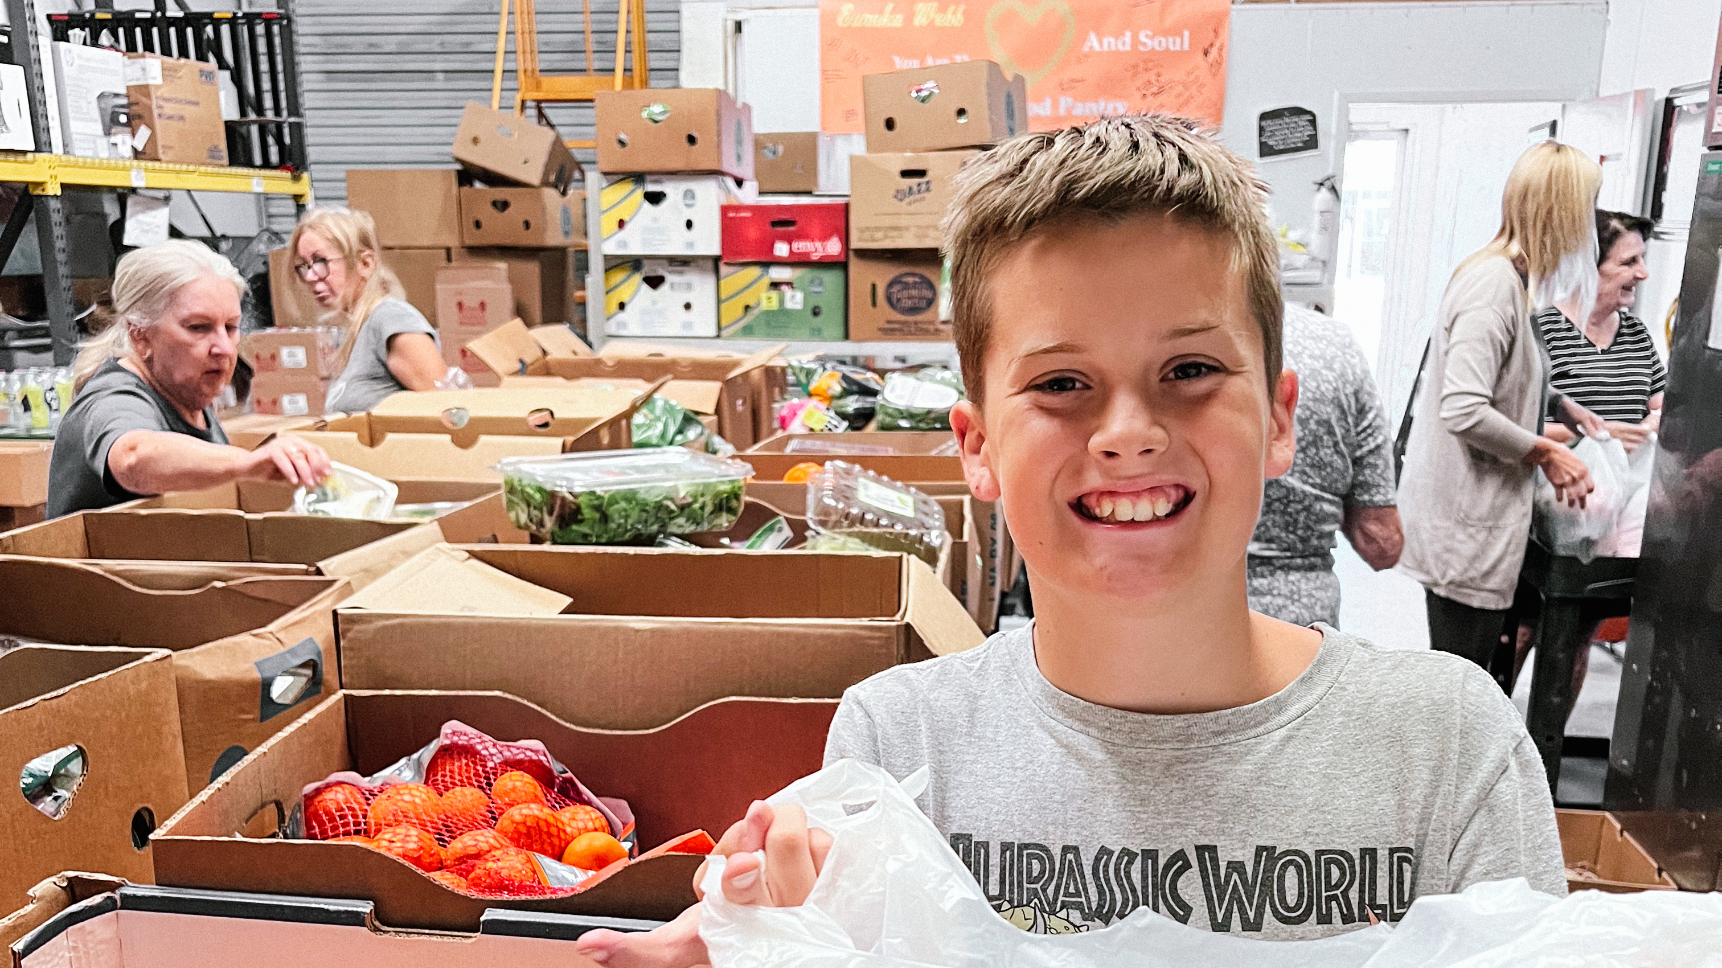 Help Sort & Pack Food For People That Needs It